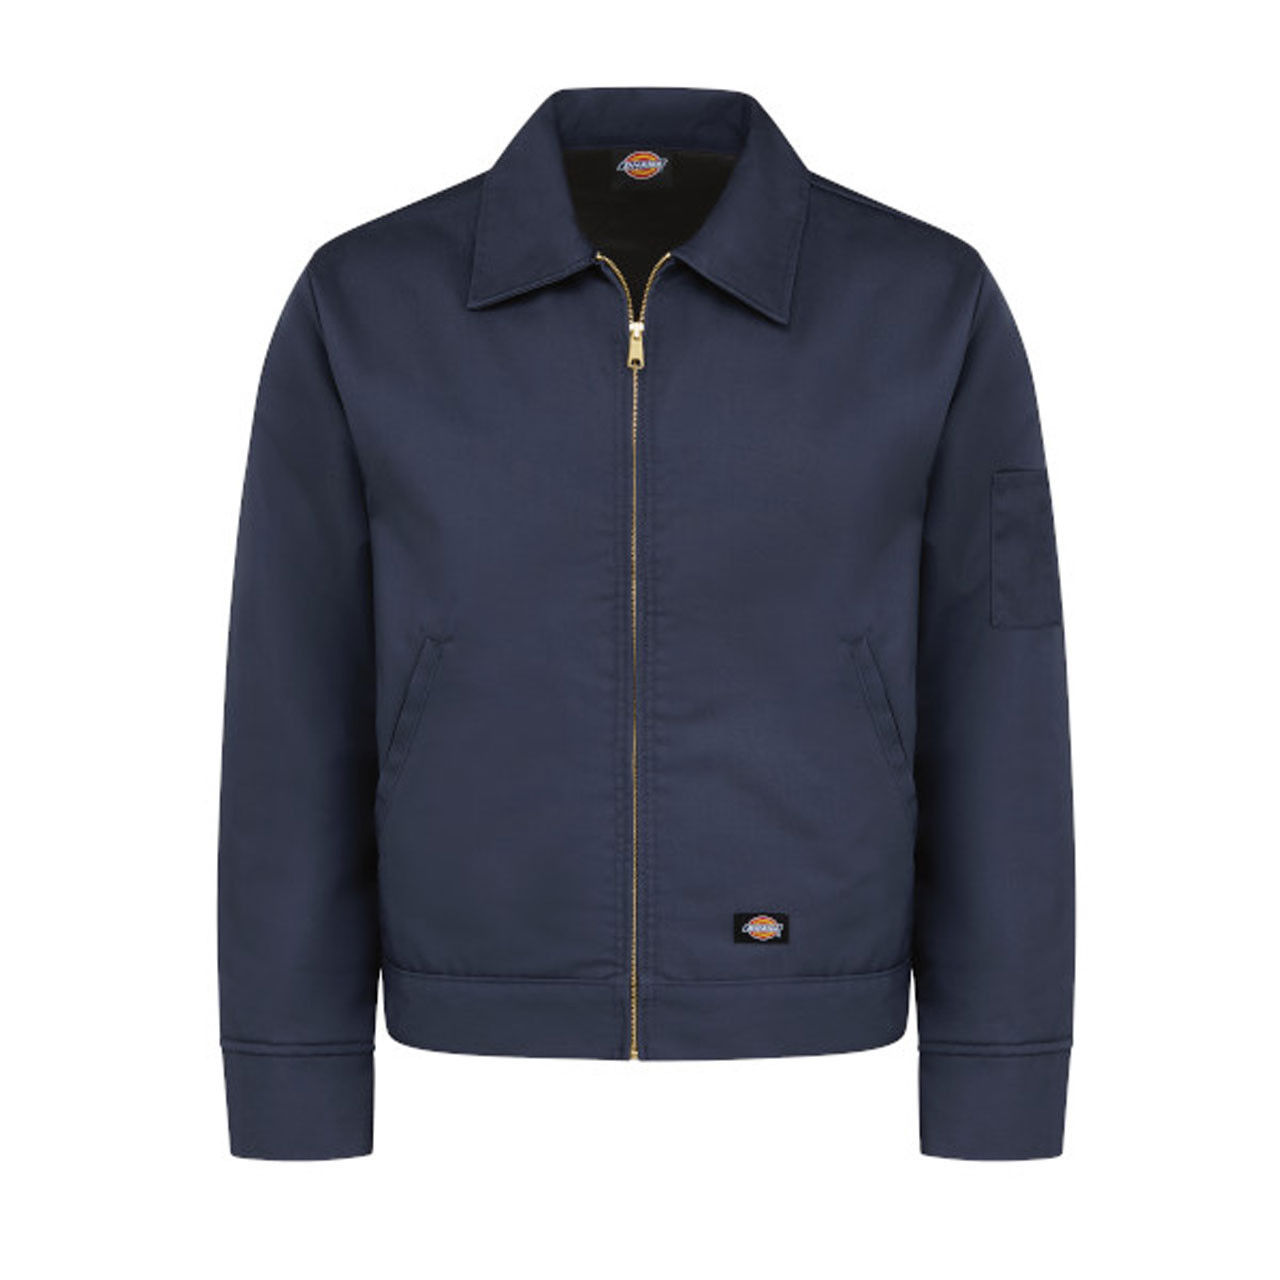 Can the Dickies Eisenhower Jacket be washed in an industrial wash?